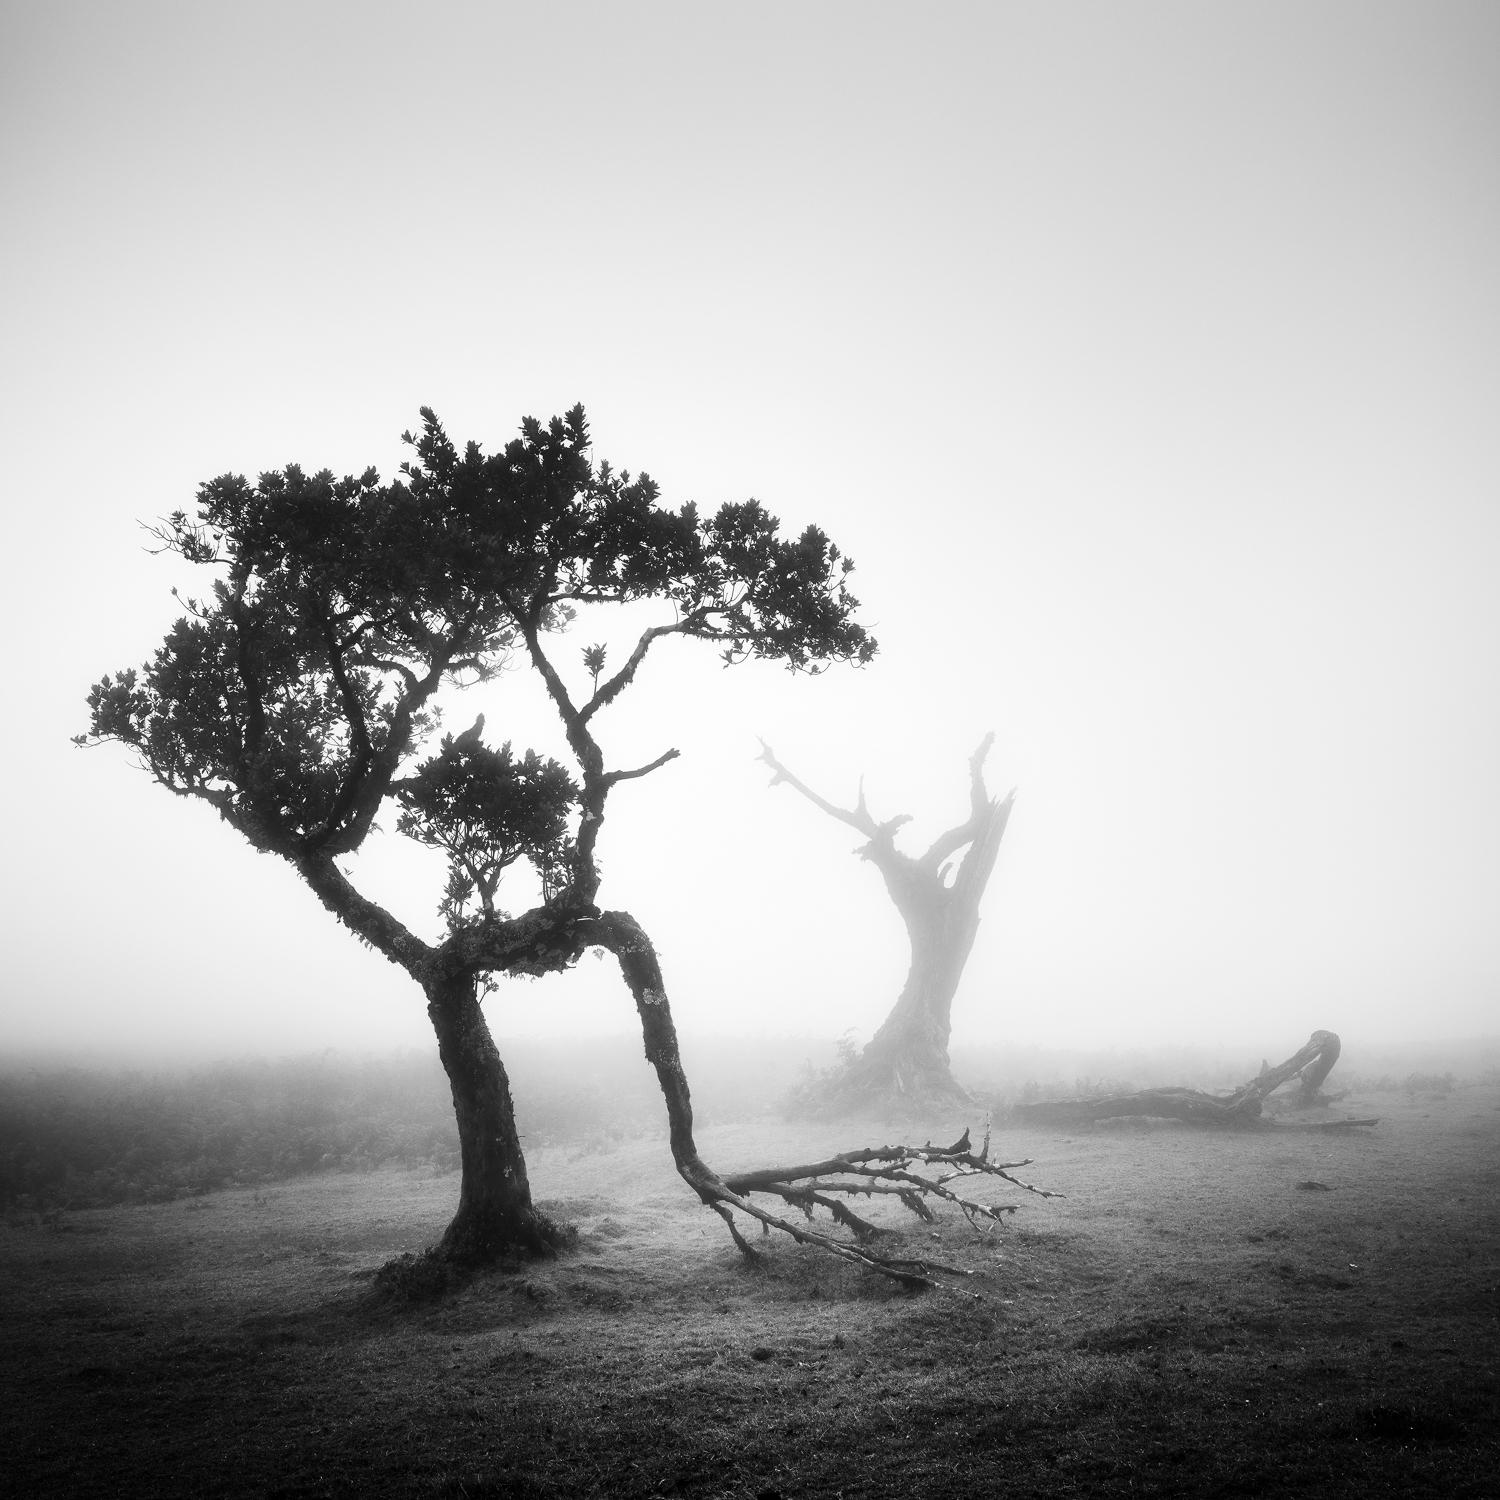  Ancient Laurel Cloud Forest, black and white photography, landscape, framed - Photograph by Gerald Berghammer